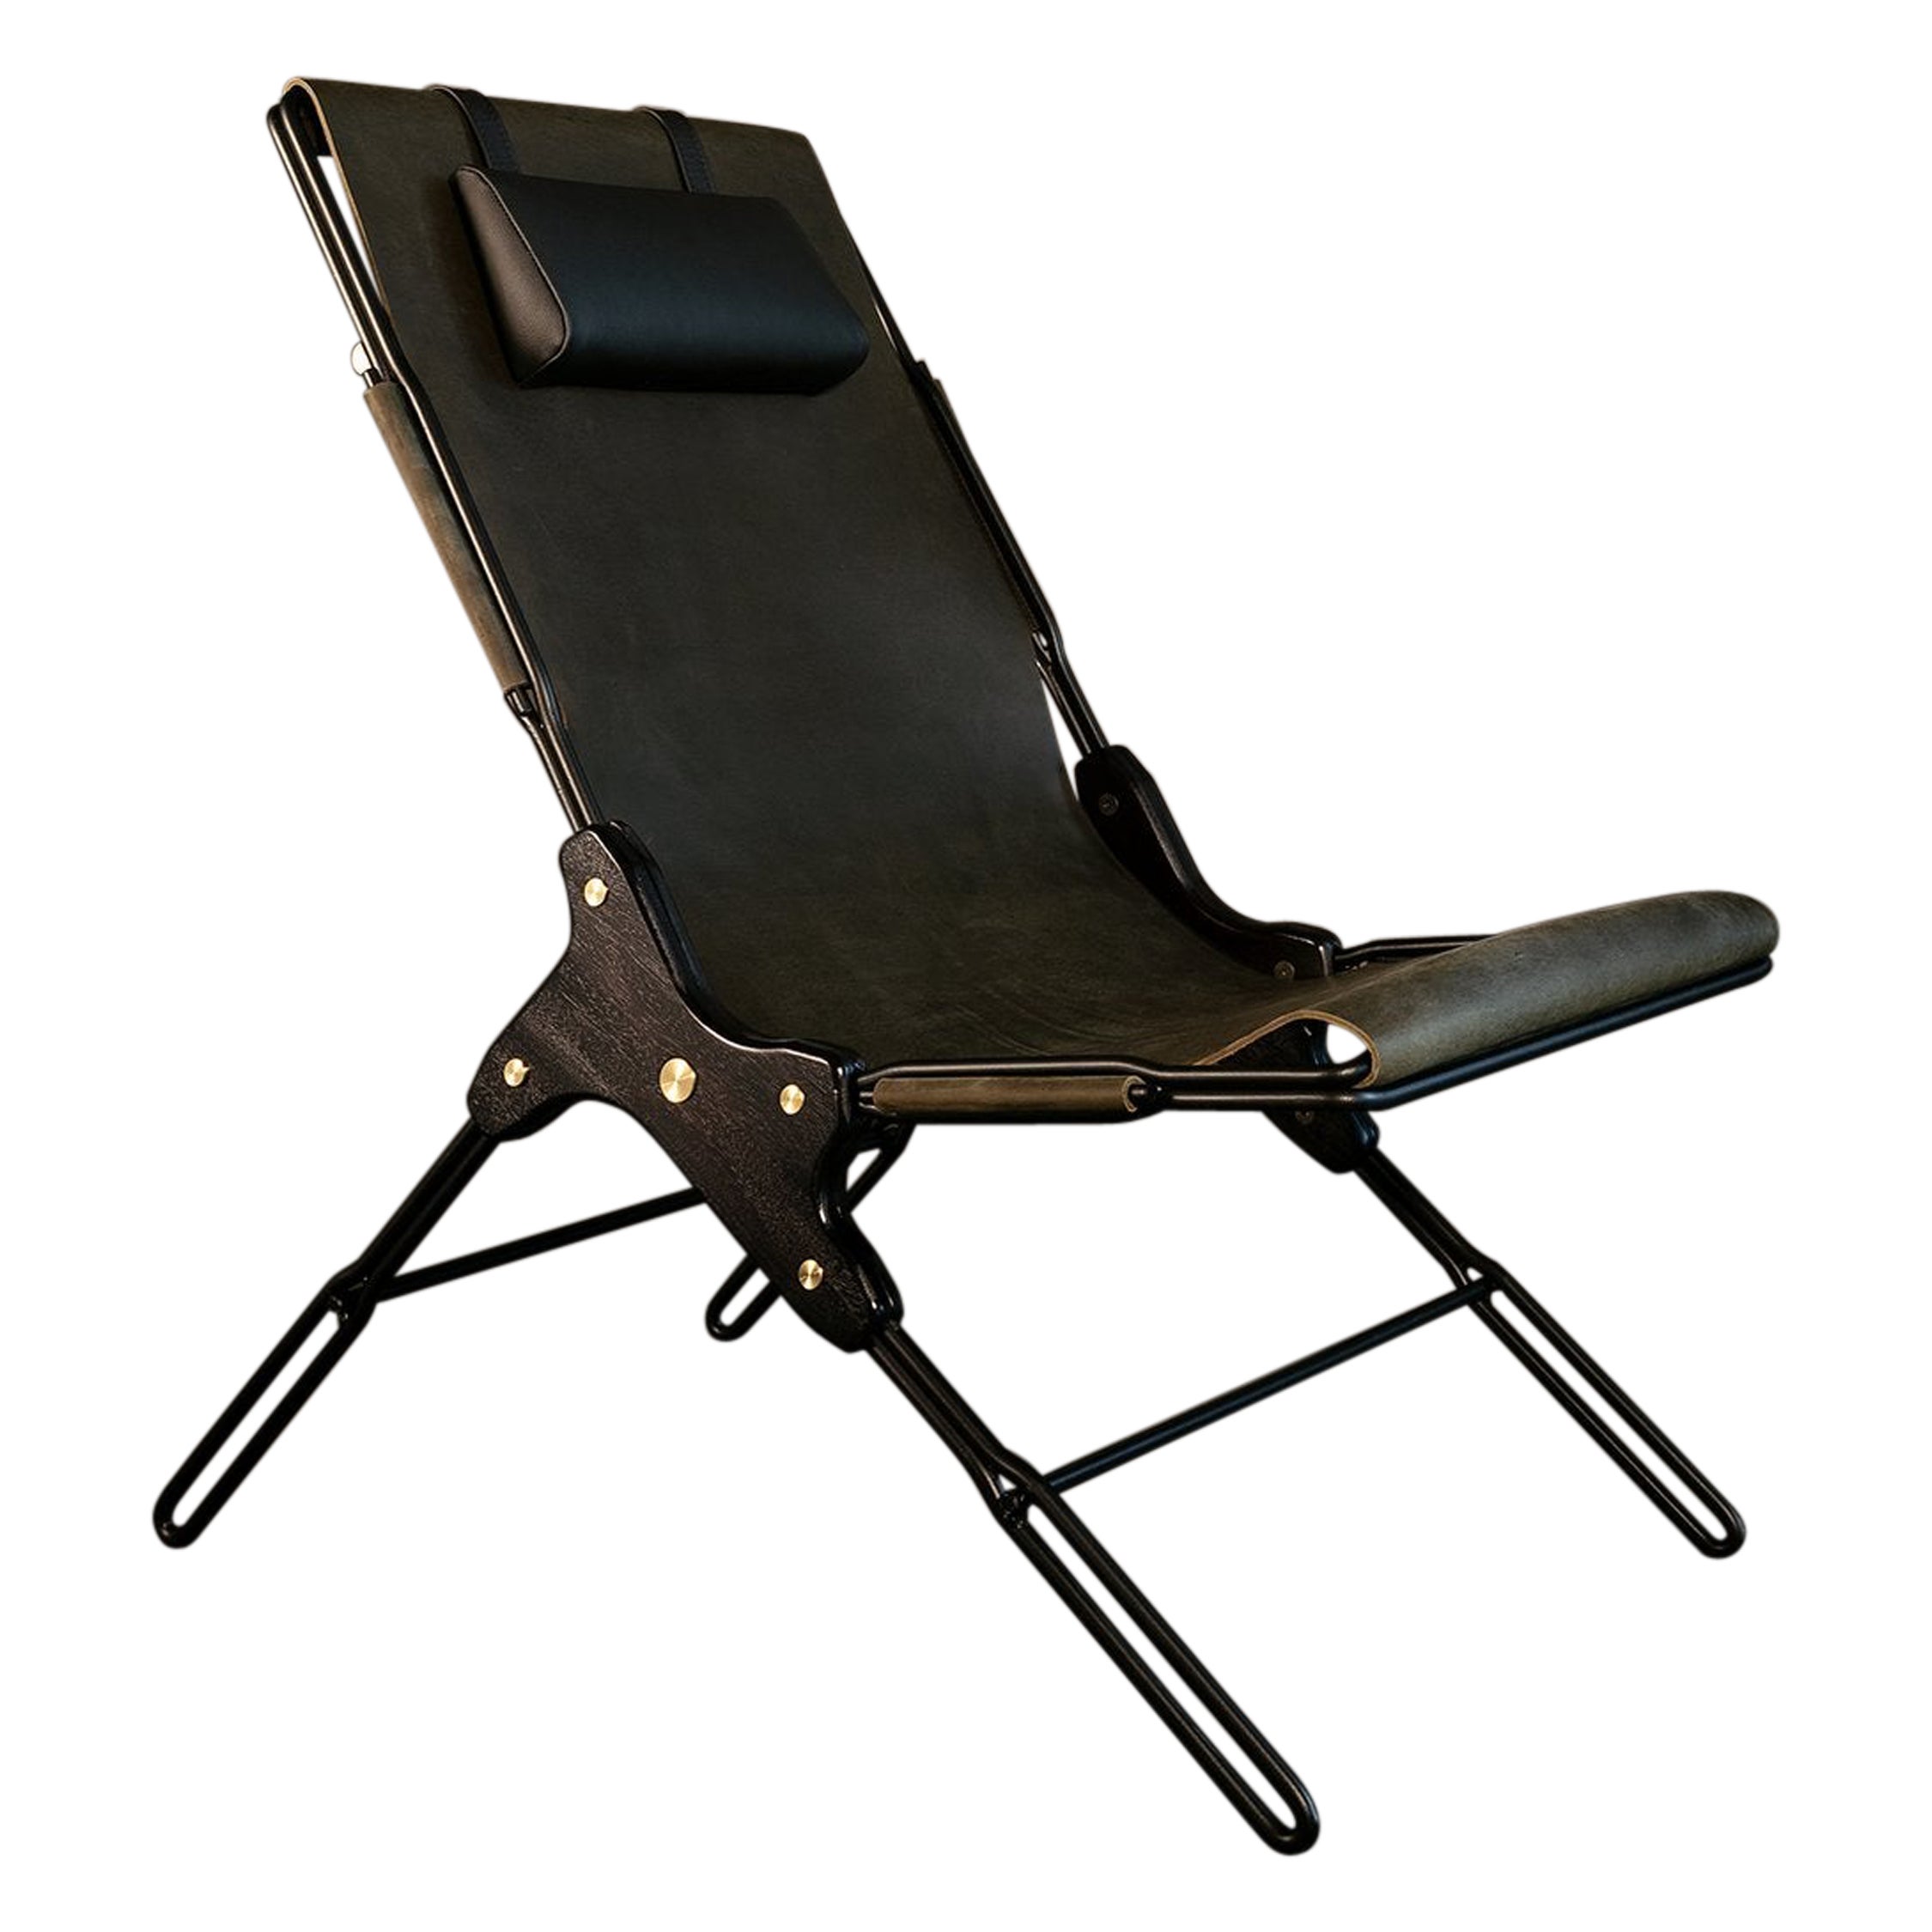 Perfidia_01 Lounge Chair Olivo by ANDEAN, REP by Tuleste Factory